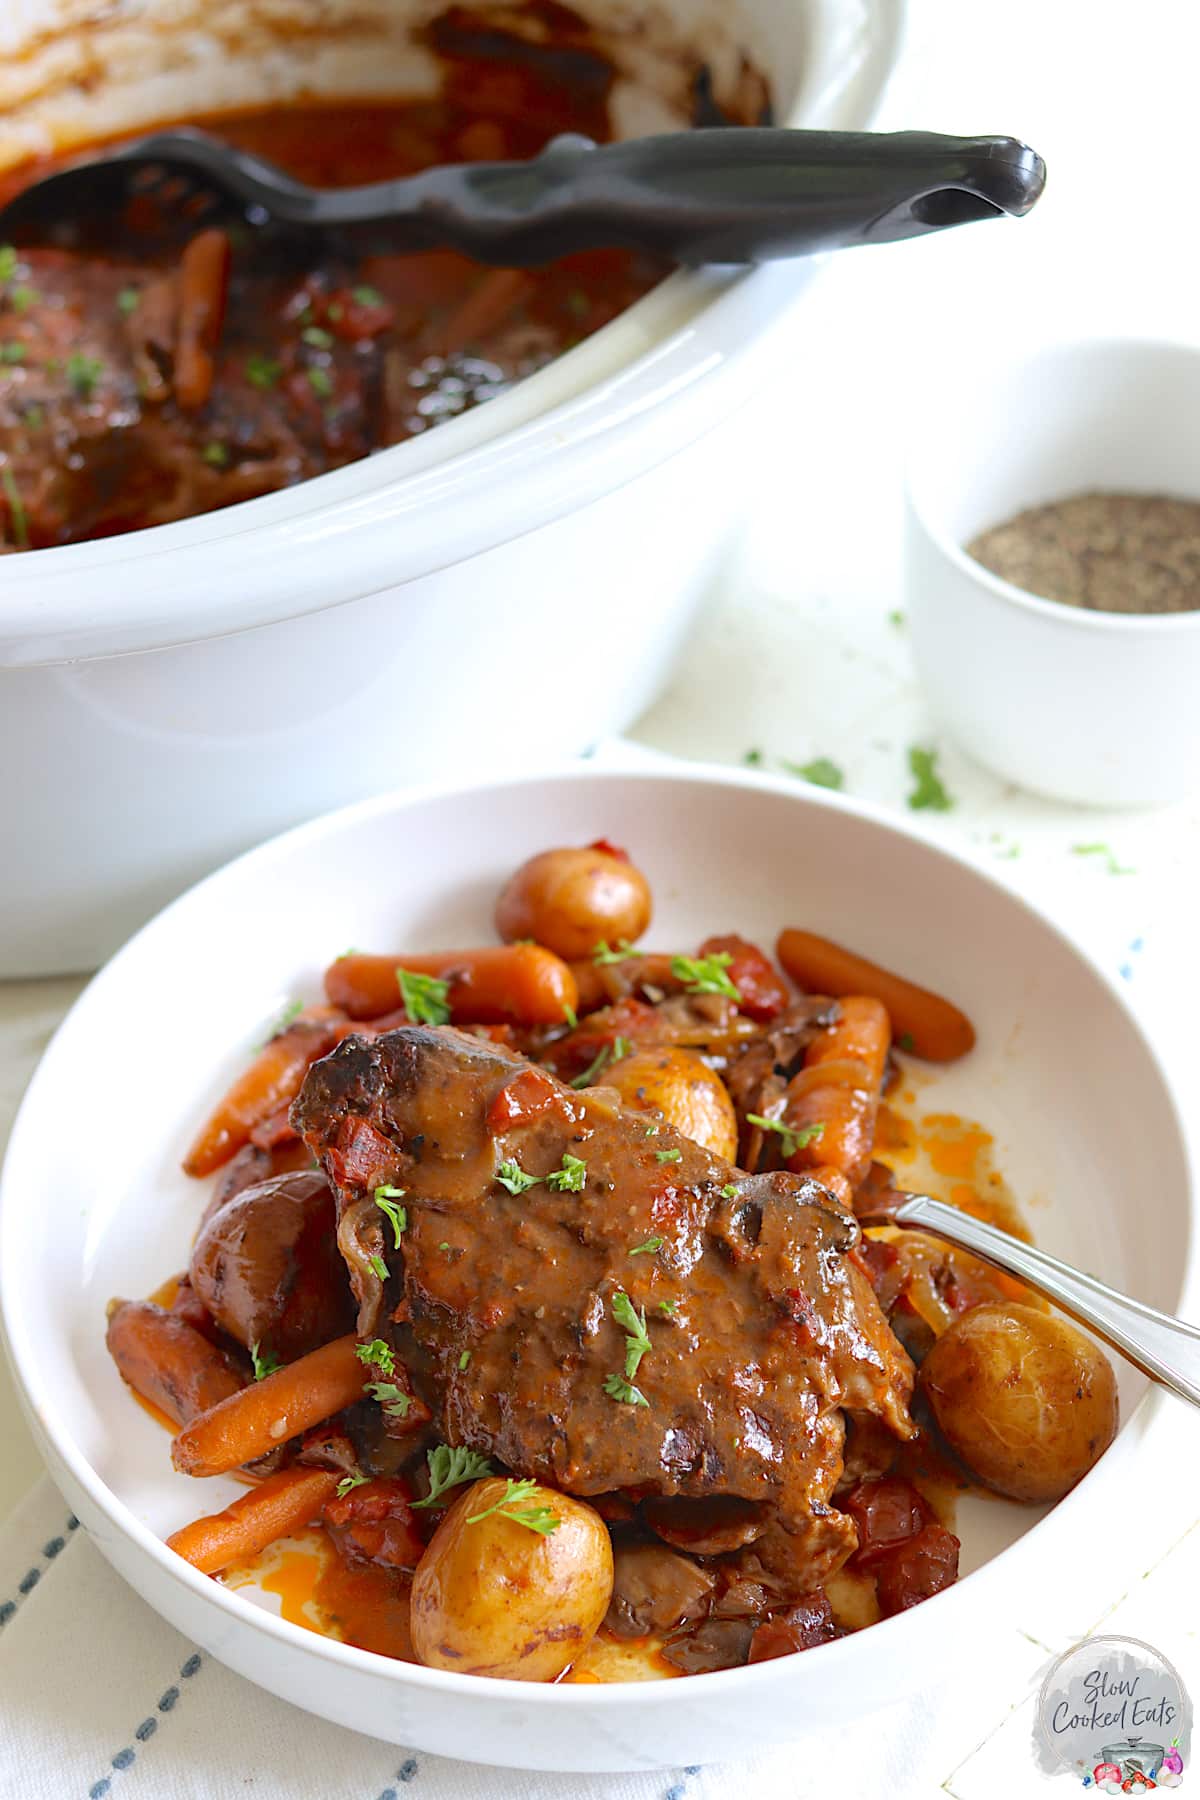 Crockpot pot roast served over carrots, potatoes, and mushrooms in a white bowl.